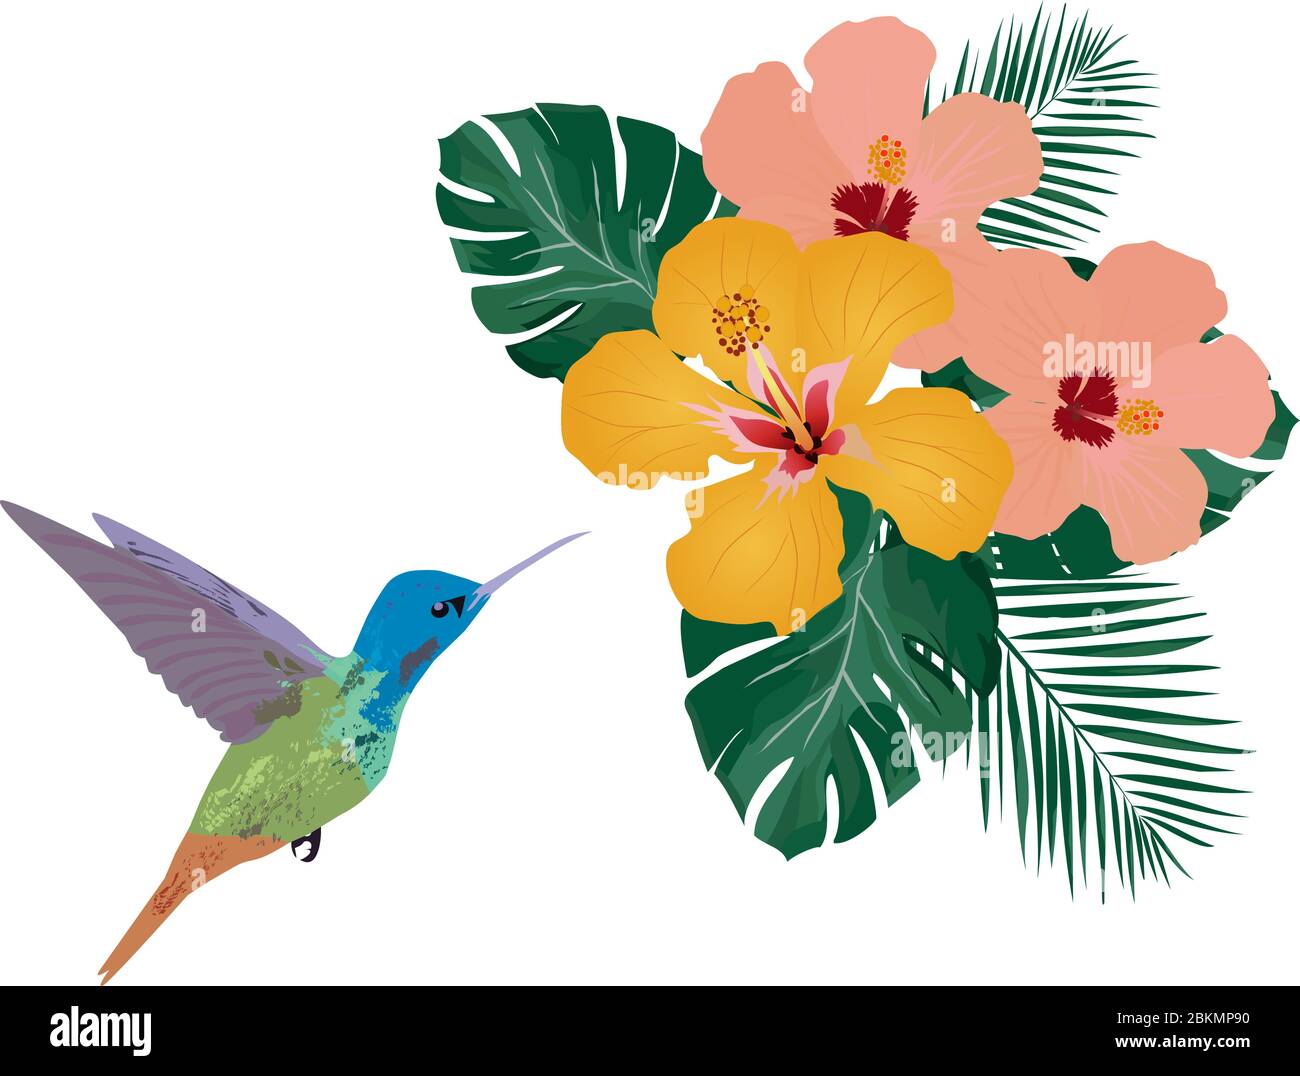 vector illustration of a tropical background. Hummingbird, tropical flowers, palm leaves. Wall decal, decor idea. Stock Vector